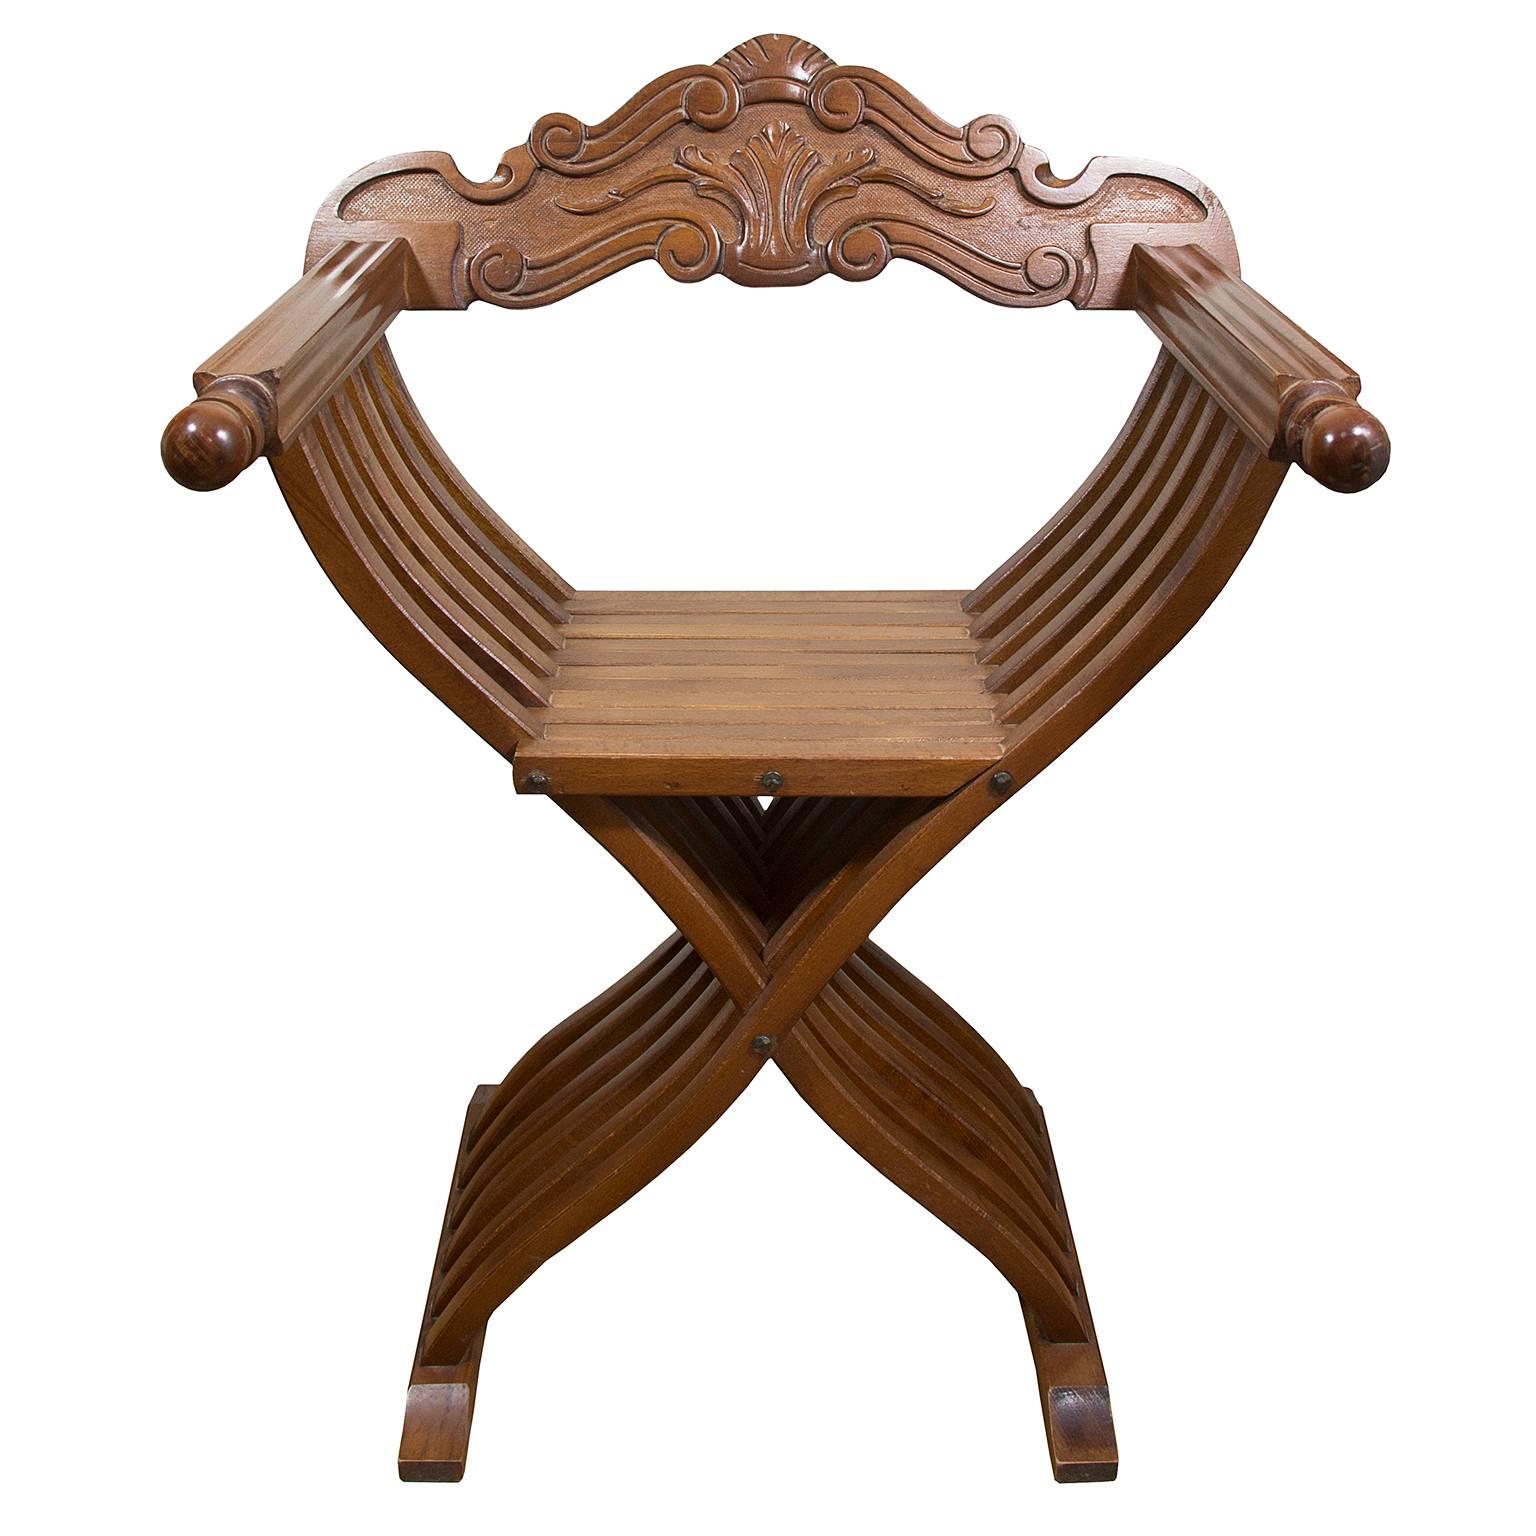 Beautiful typical Florentine Renaissance style carved wood folding Savonarola chair
Excellent vintage condition (please see photos). 

Measurements:
Height 84 cm / 33.1 inch
Width 65 cm / 25.6 inch
Handle length 45 cm / 17.7 inch

A type of